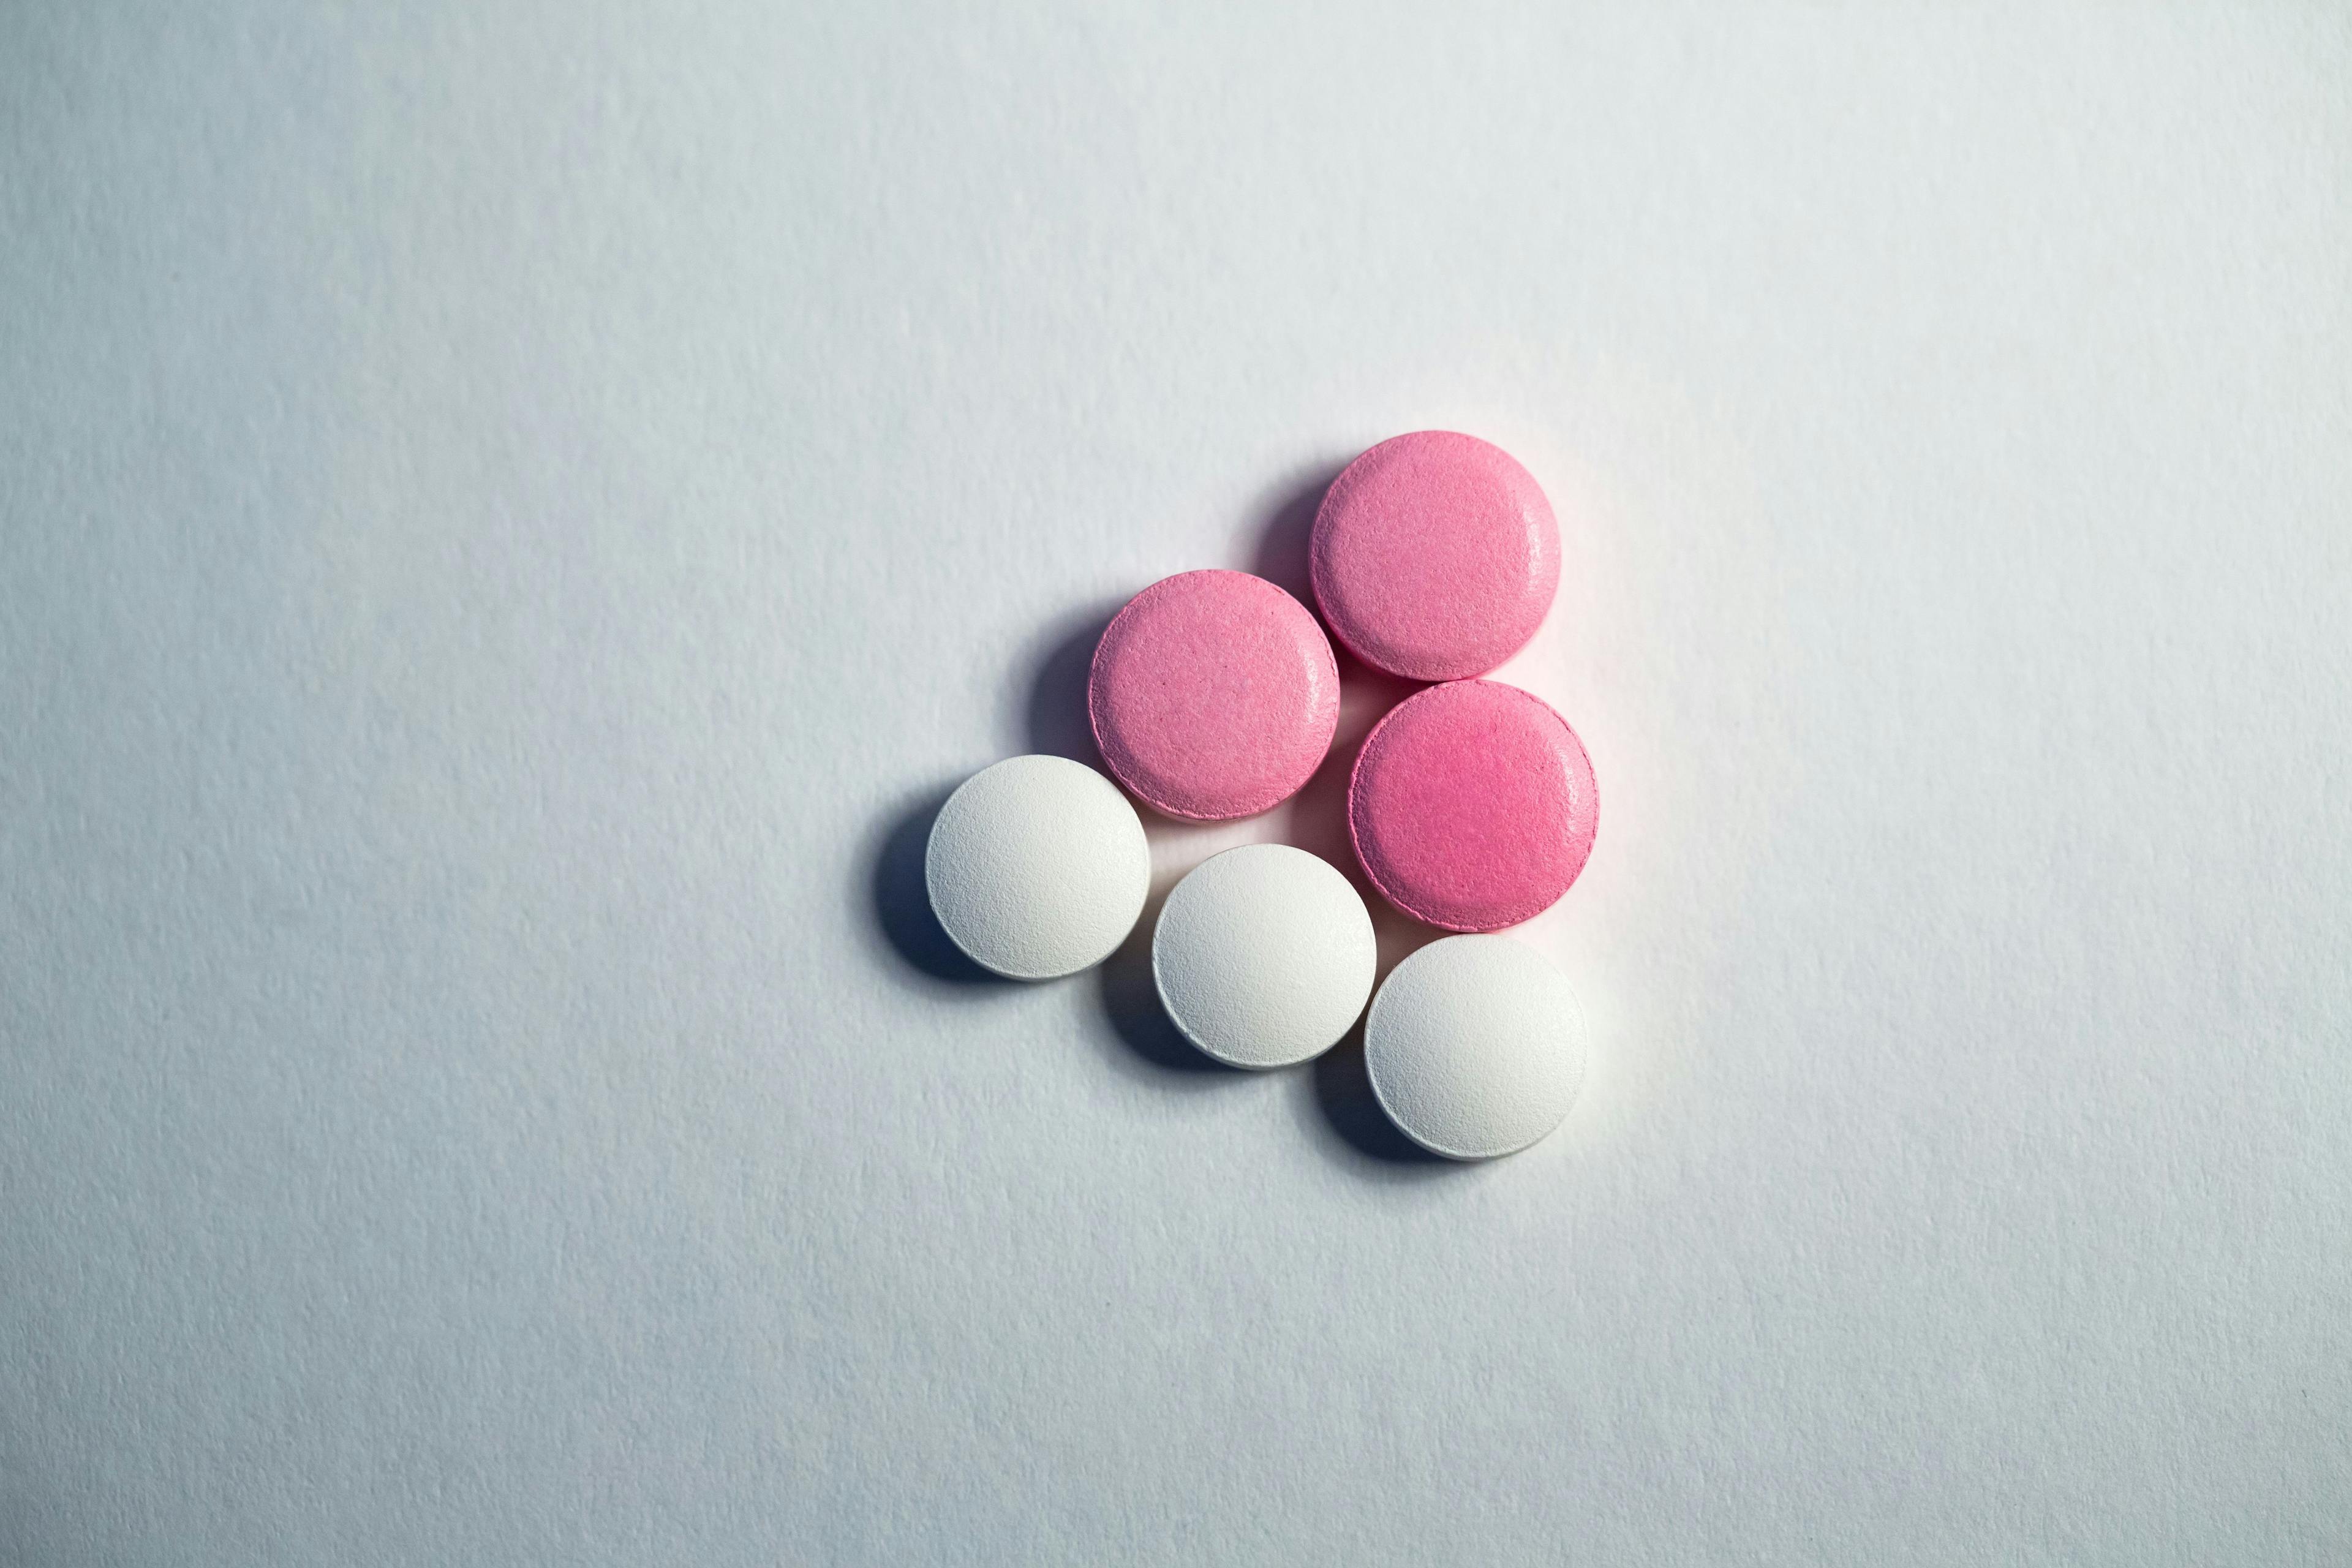 FDA: Warning Issued to Sites Selling Products Marketed as Adderall